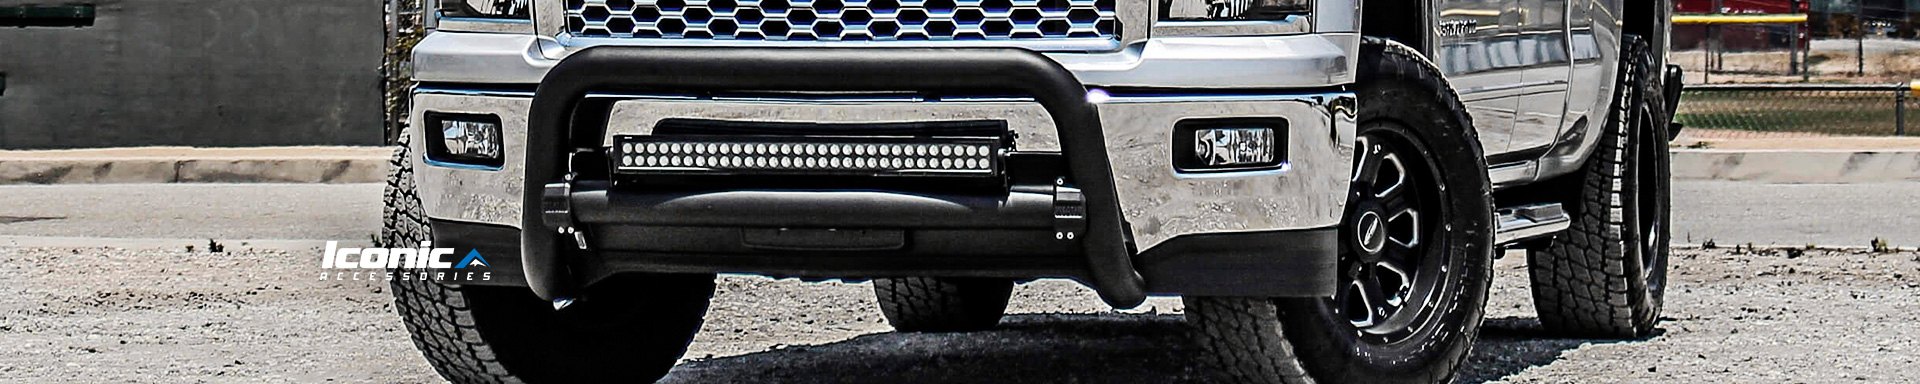 Iconic Accessories Spare Tire Covers & Carriers